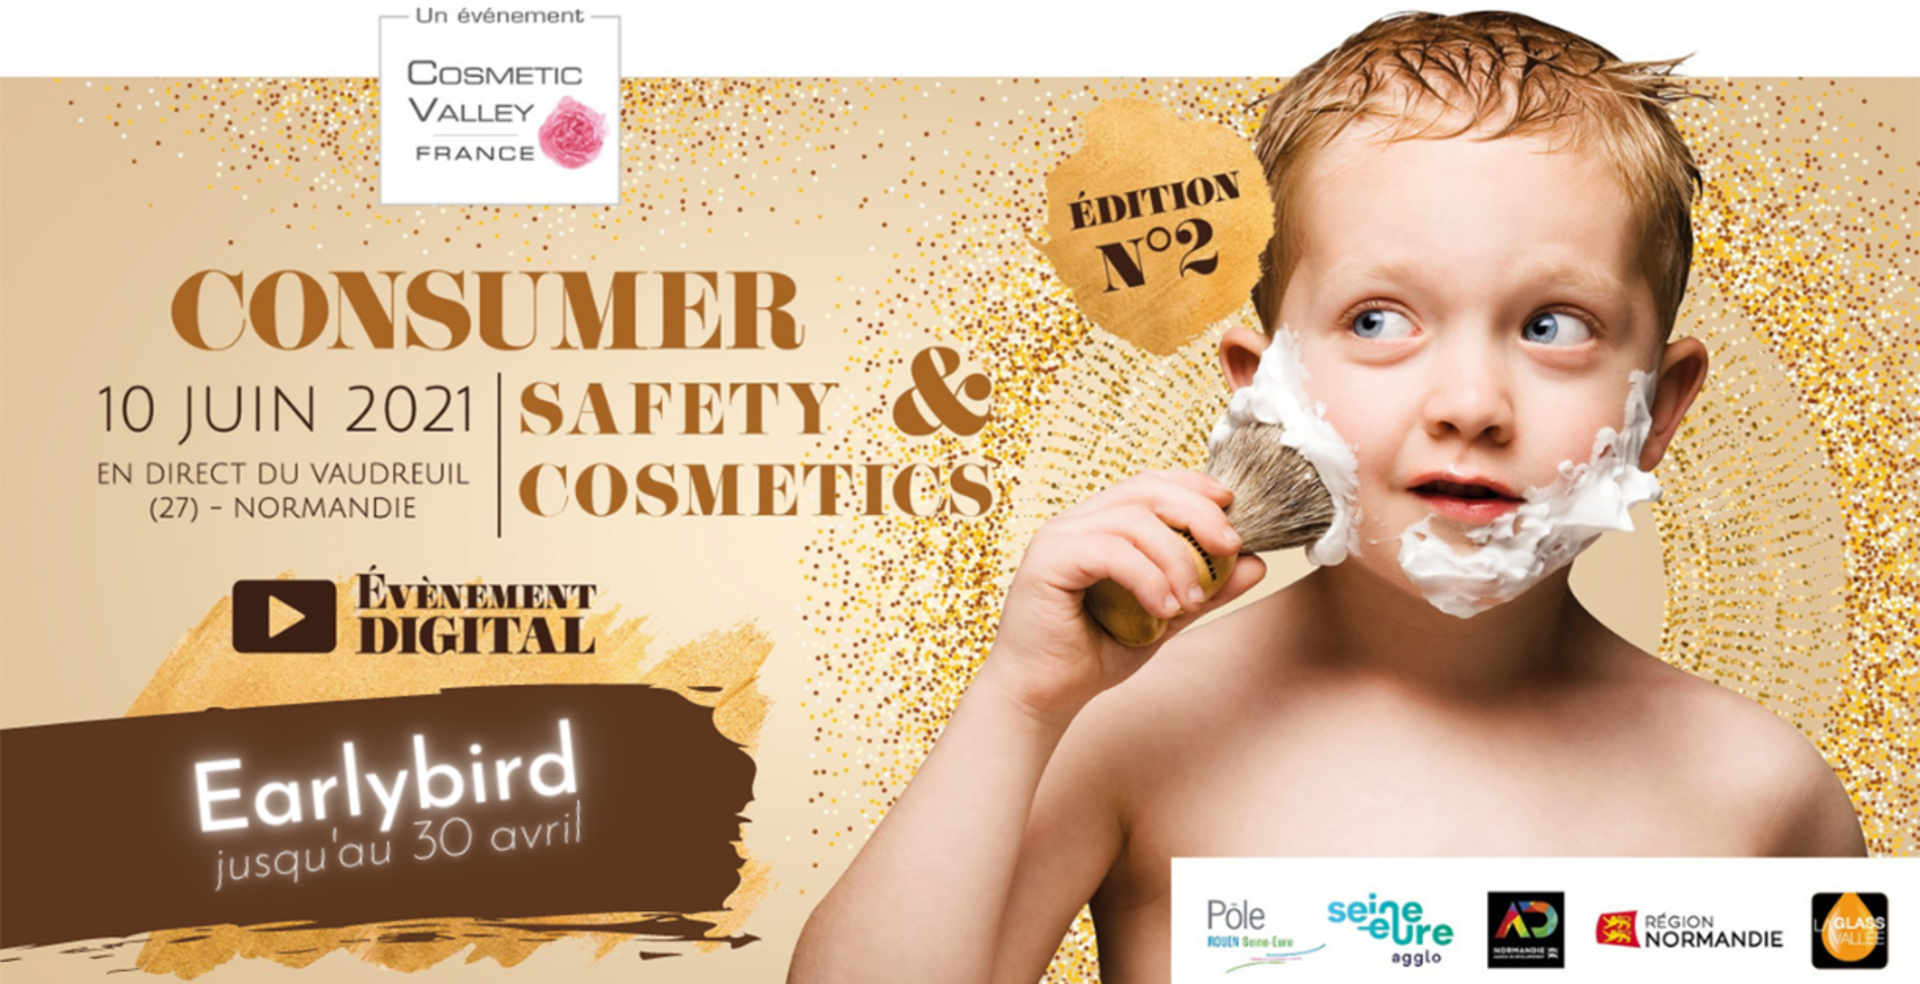 Cosmetic Valley 2021 - Consumer safety and Cosmetics N°2